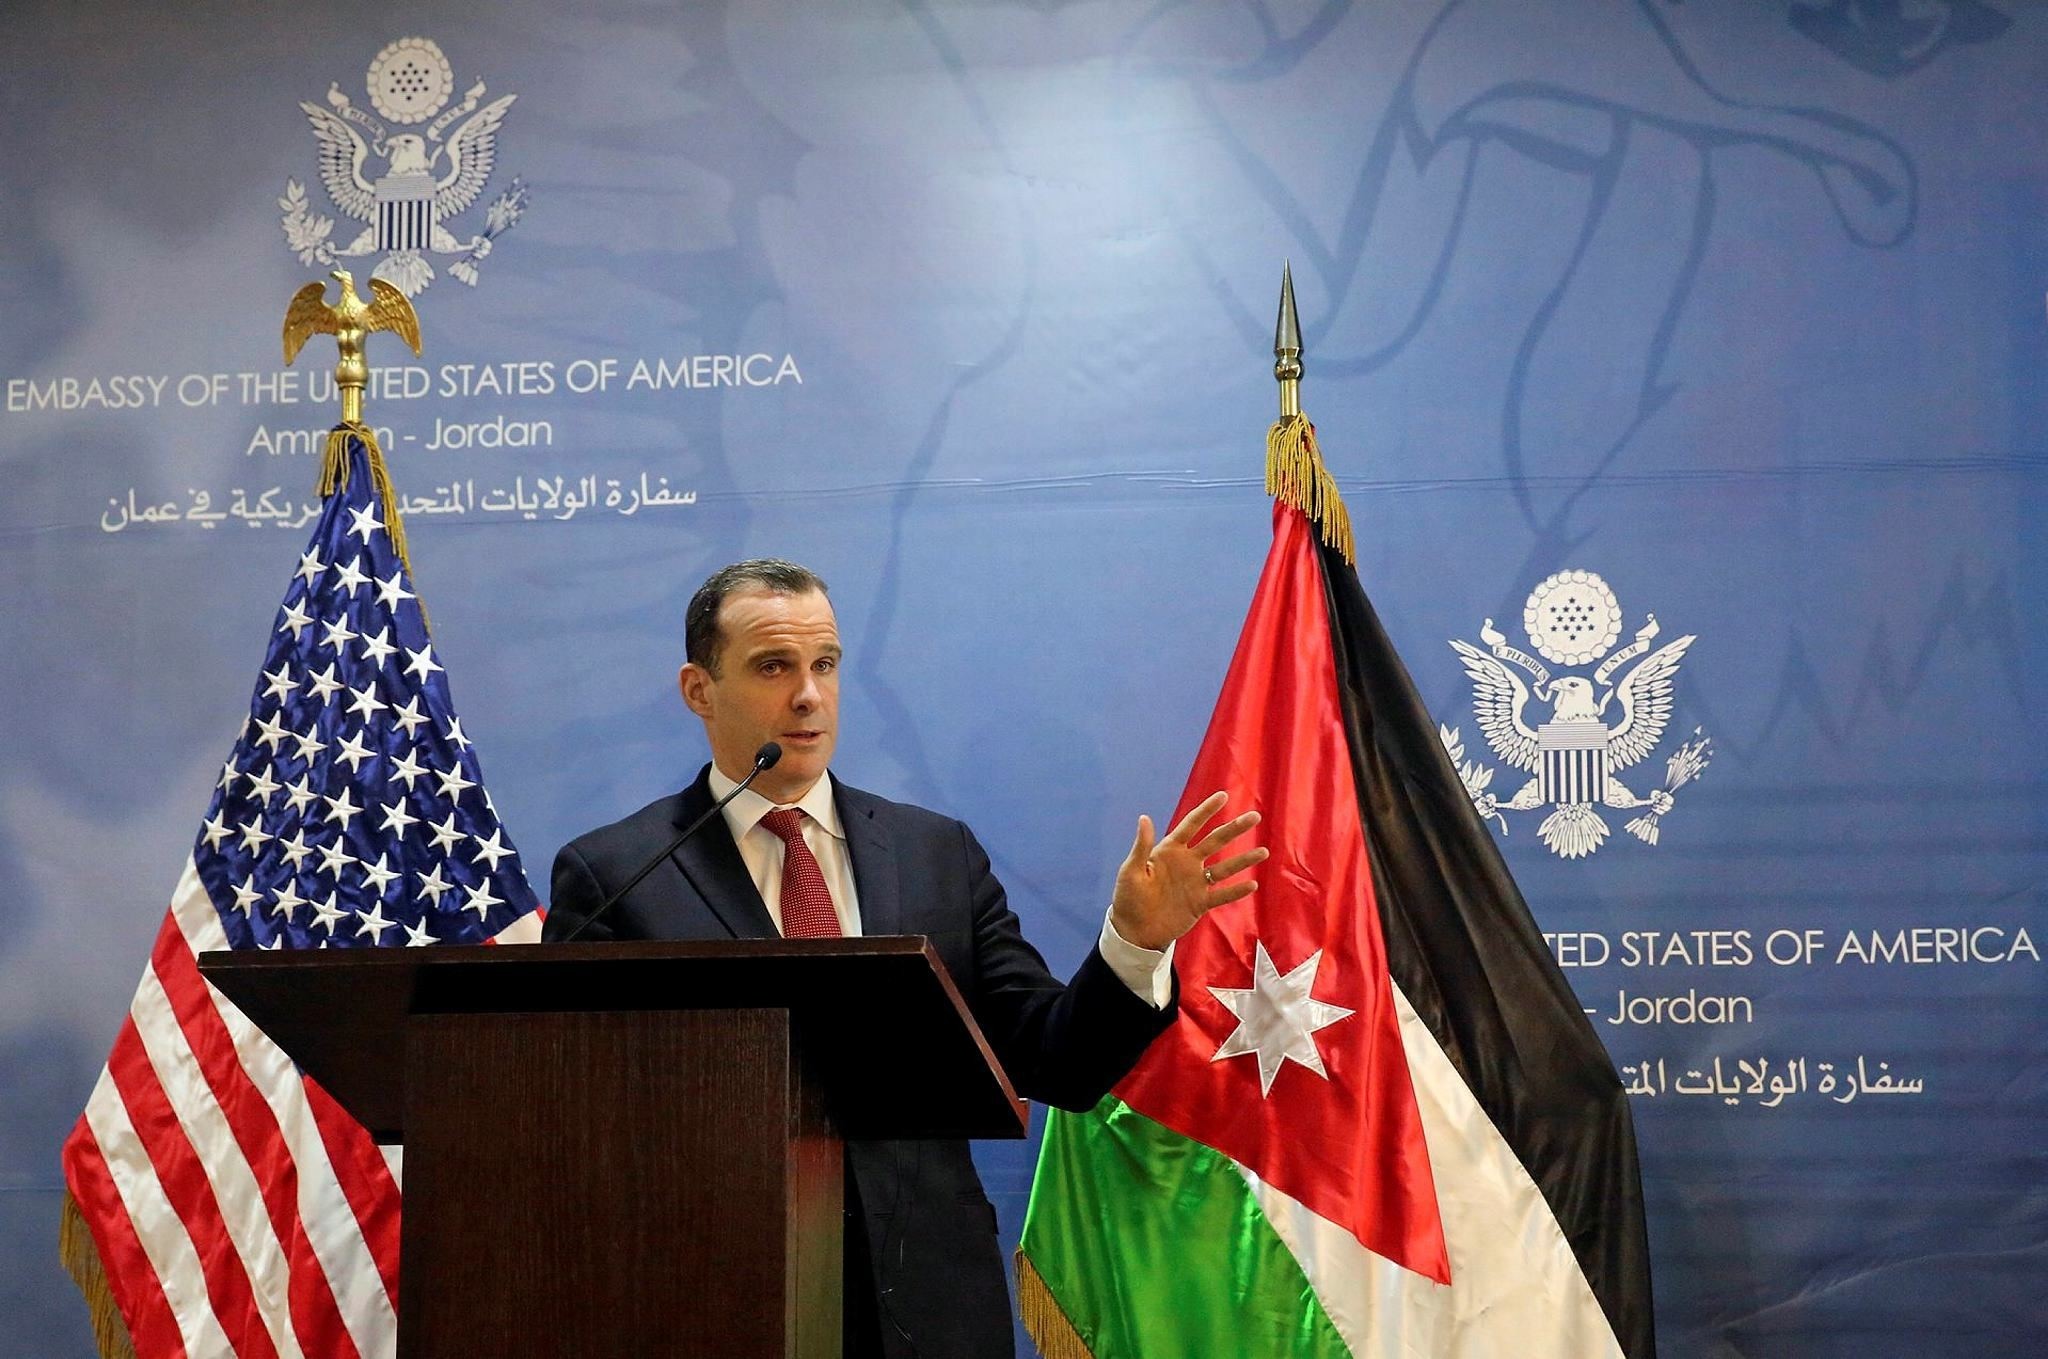 Brett McGurk, the White House envoy to the U.S.-led military coalition against Daesh, speaks during a press conference at the U.S. Embassy in Amman, Jordan, Sunday, Nov. 6, 2016. (AP Photo)